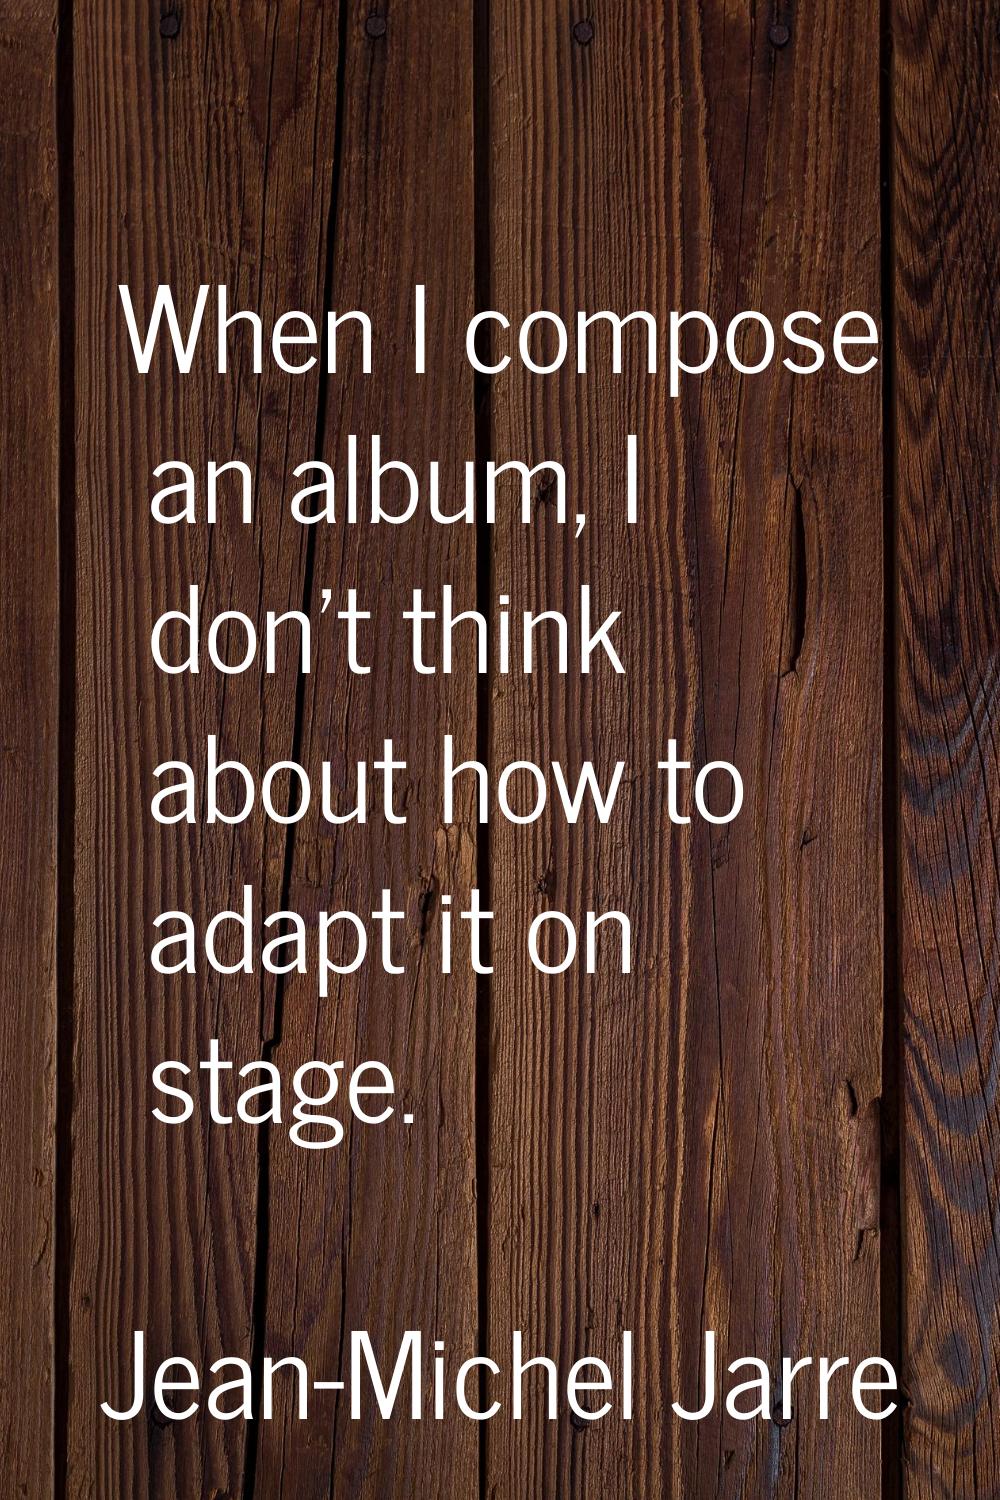 When I compose an album, I don't think about how to adapt it on stage.